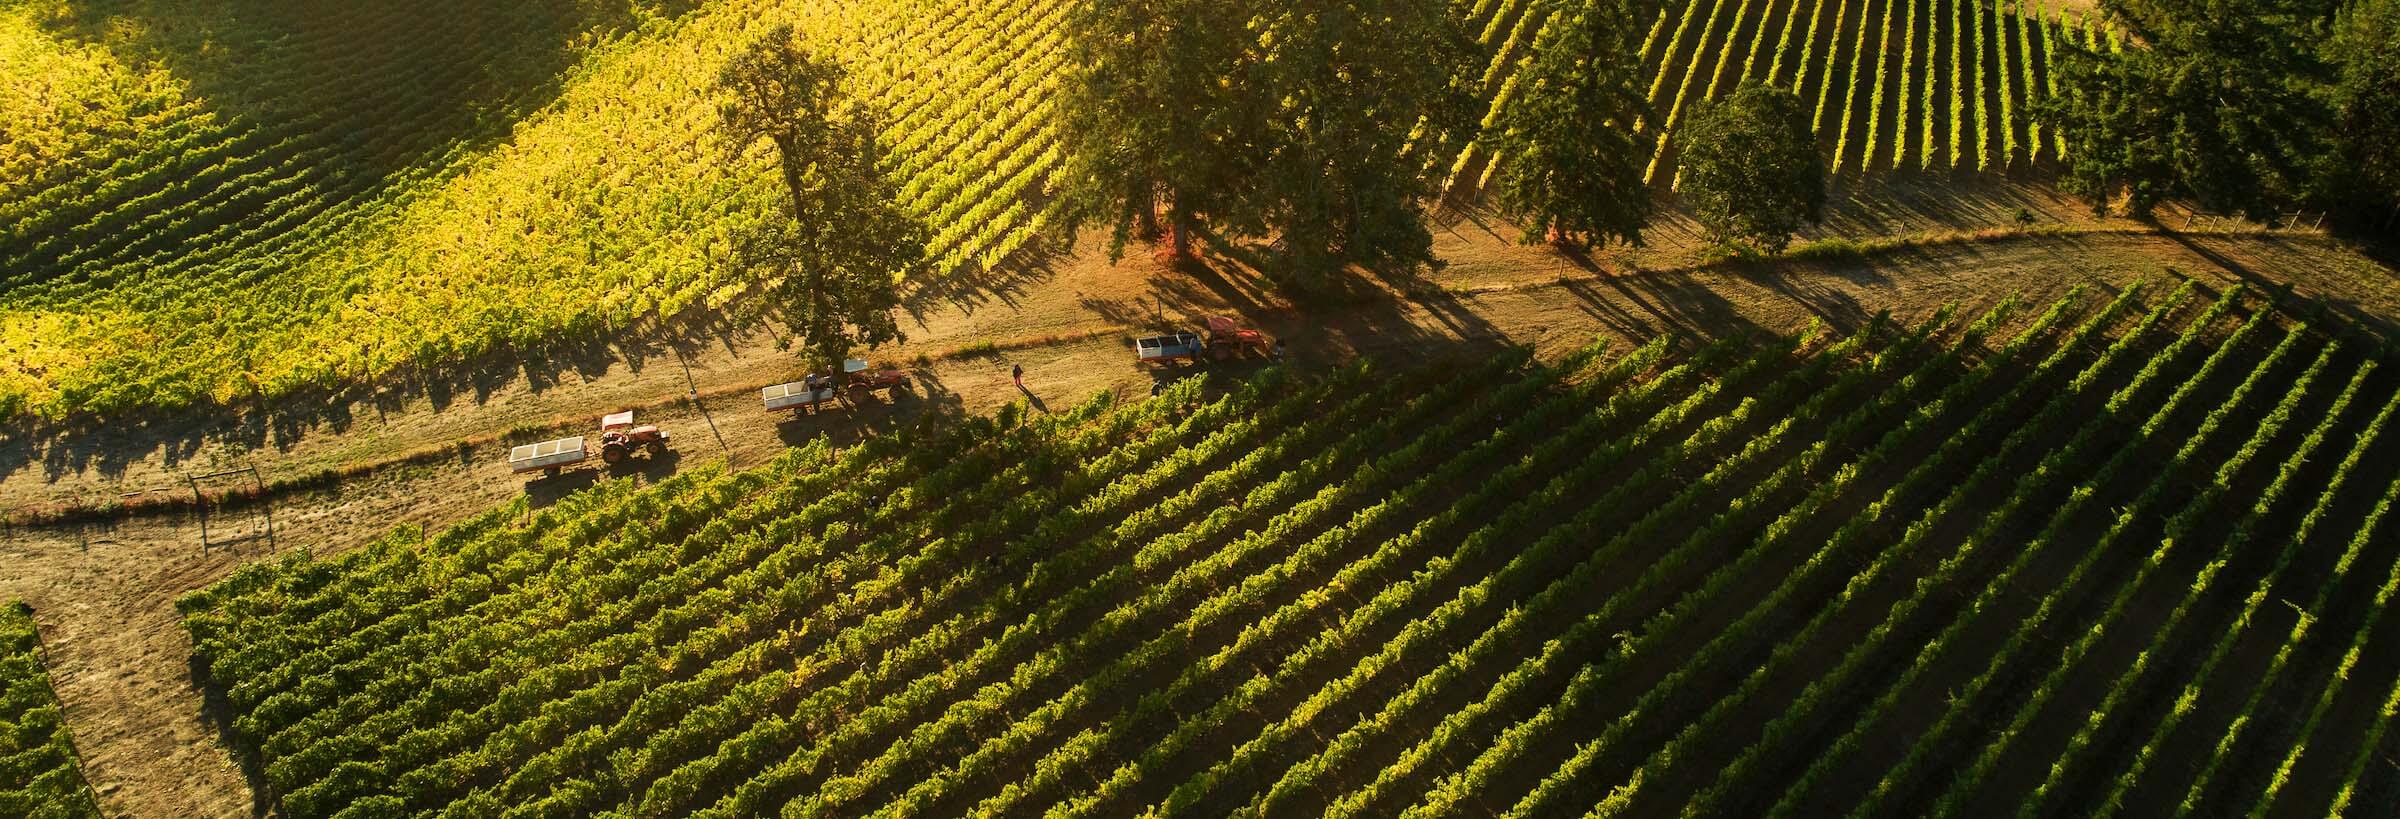 photo from above a row of 3 tractors and trailers on a dirt track between rows of vines. Tall trees next to the track cast long shadows across the straight rows of vines